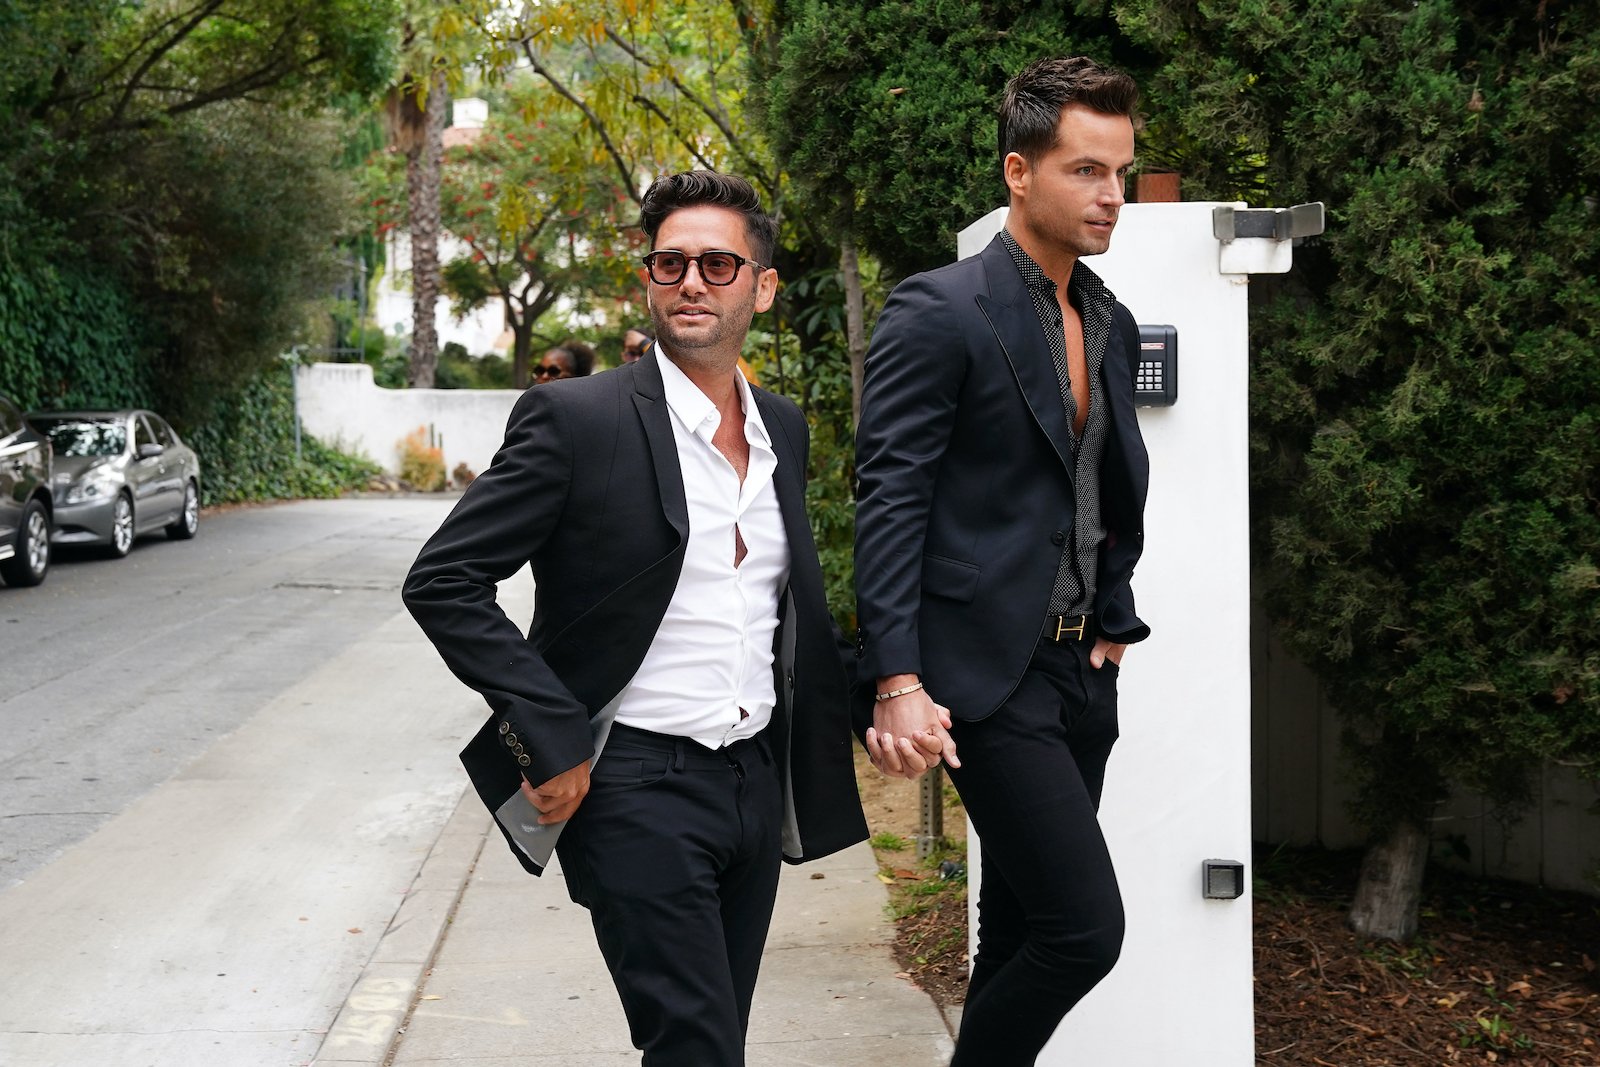 Josh Flagg and Bobby Boyd hold hands on their way into a listing on 'Million Dollar Listing'